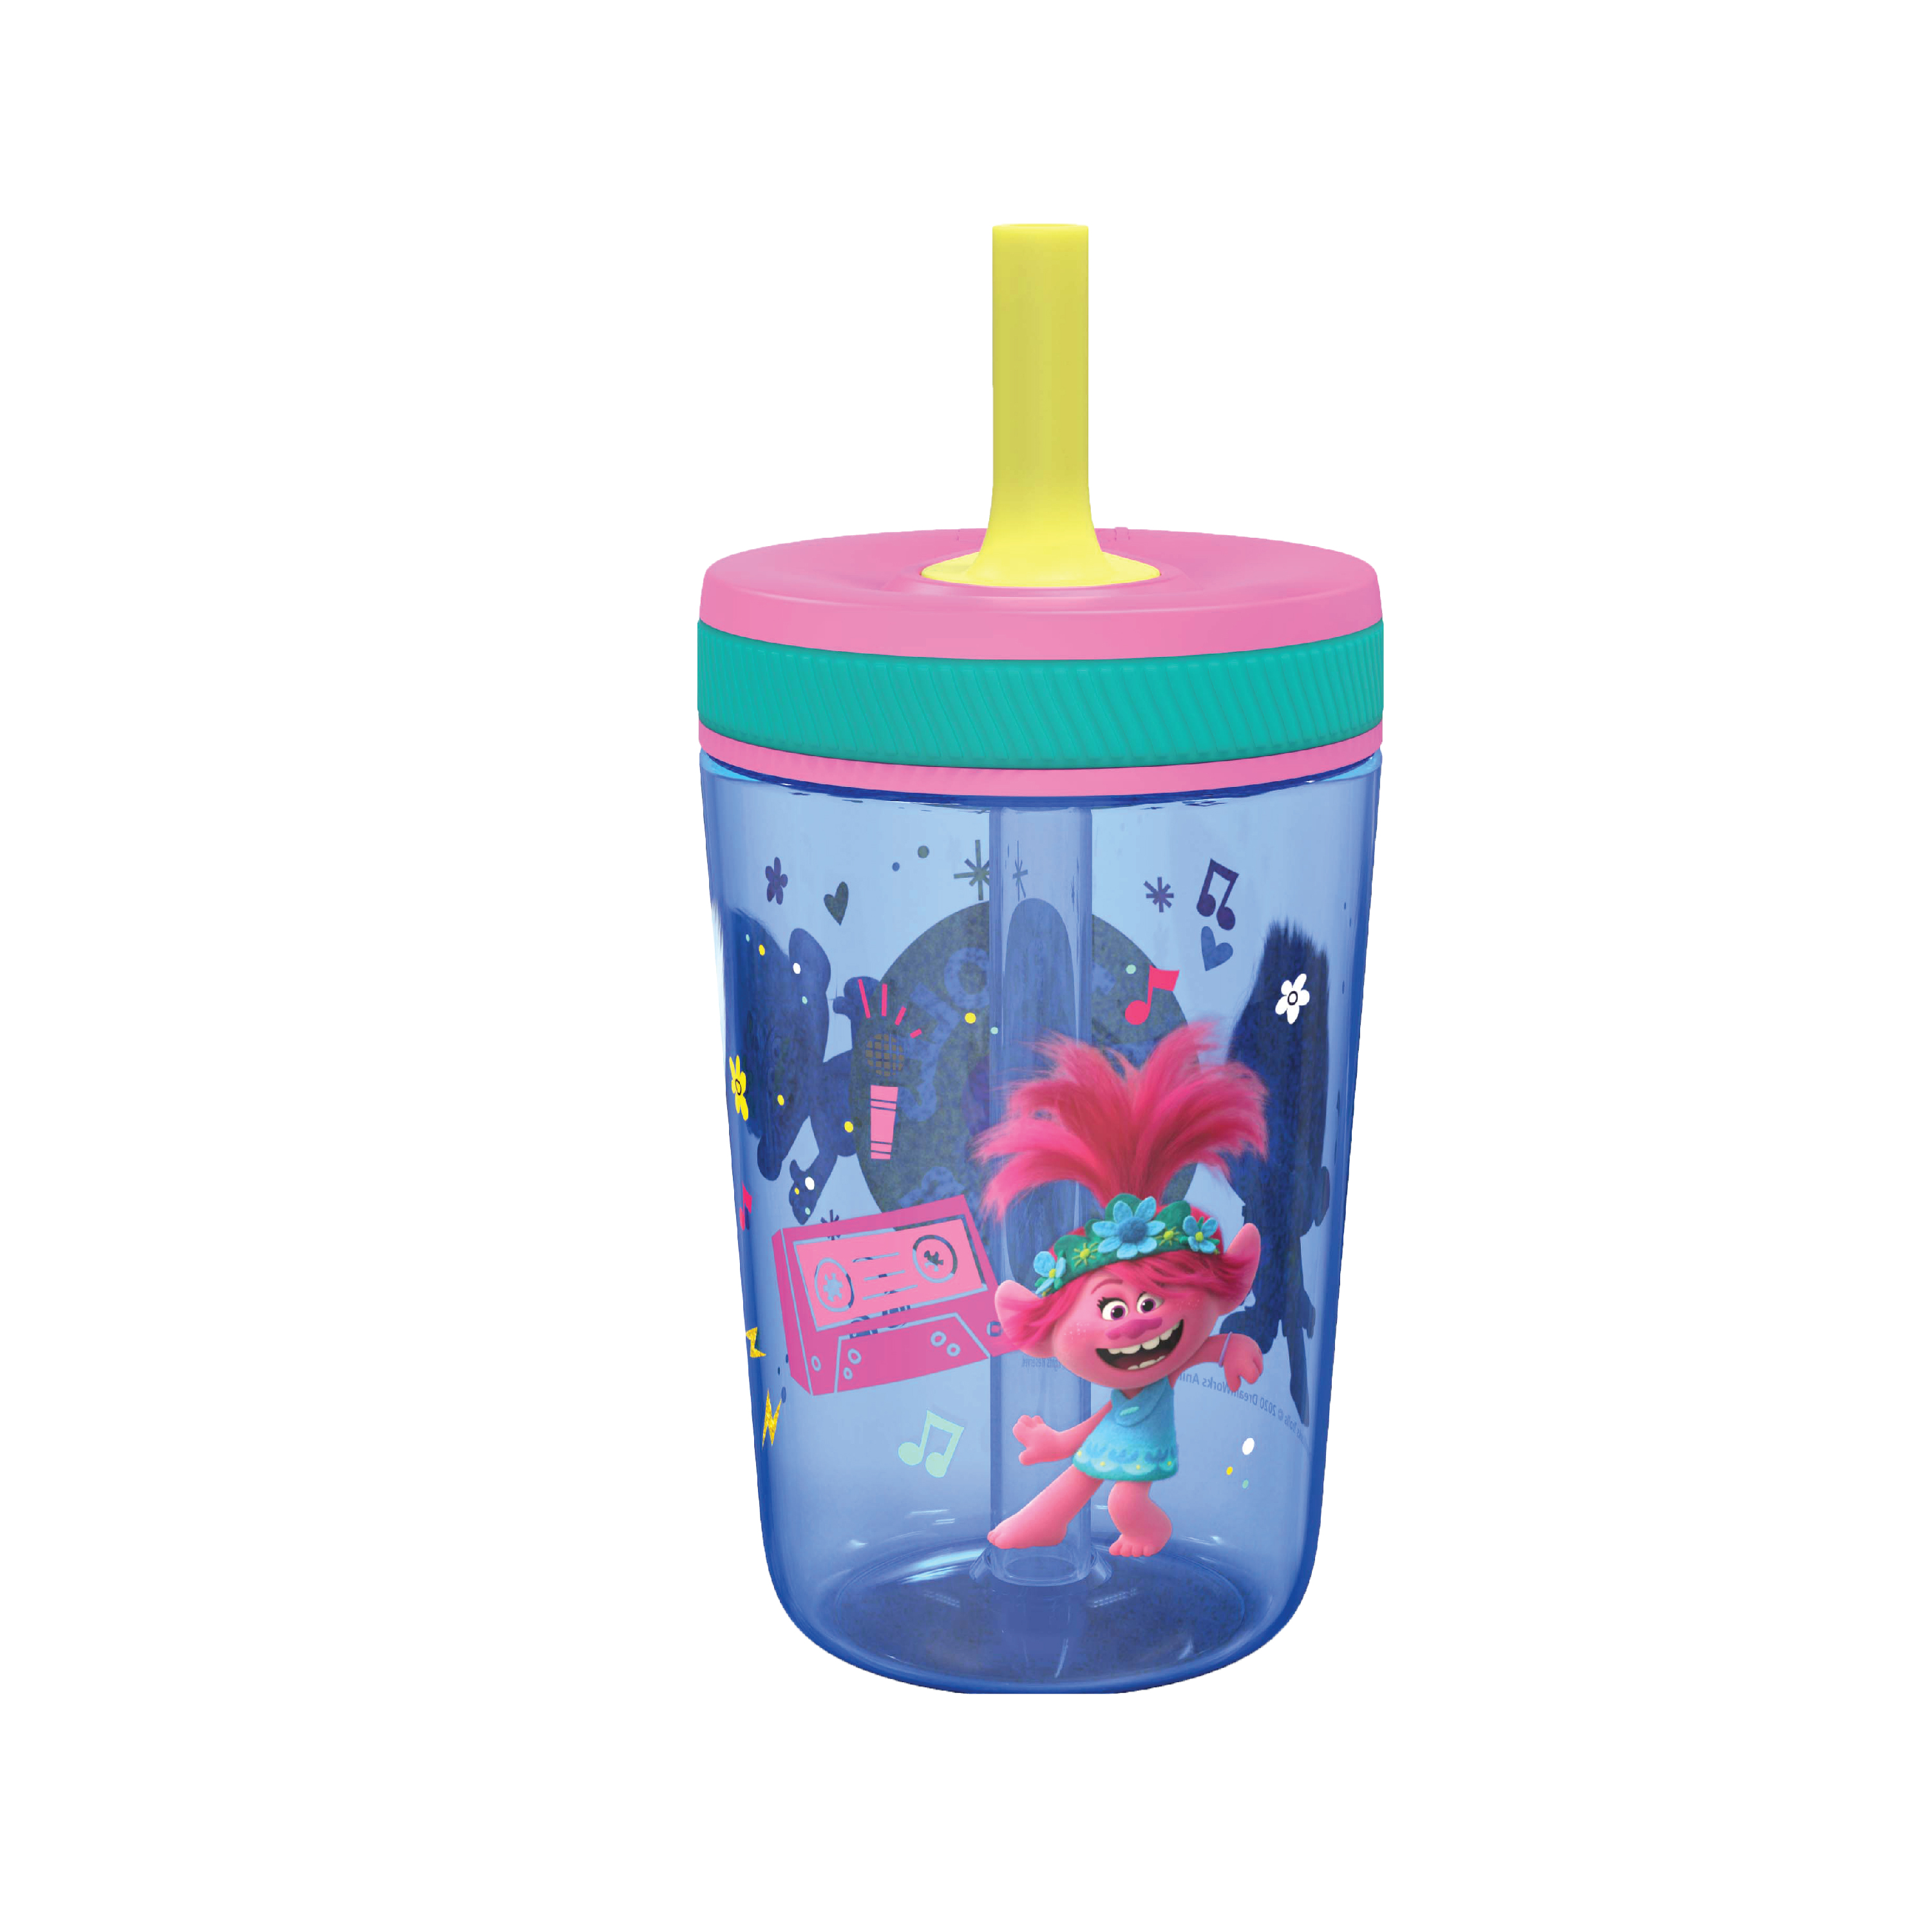 Trolls 2 Movie 15  ounce Plastic Tumbler with Lid and Straw, Poppy and Friends, 2-piece set slideshow image 5